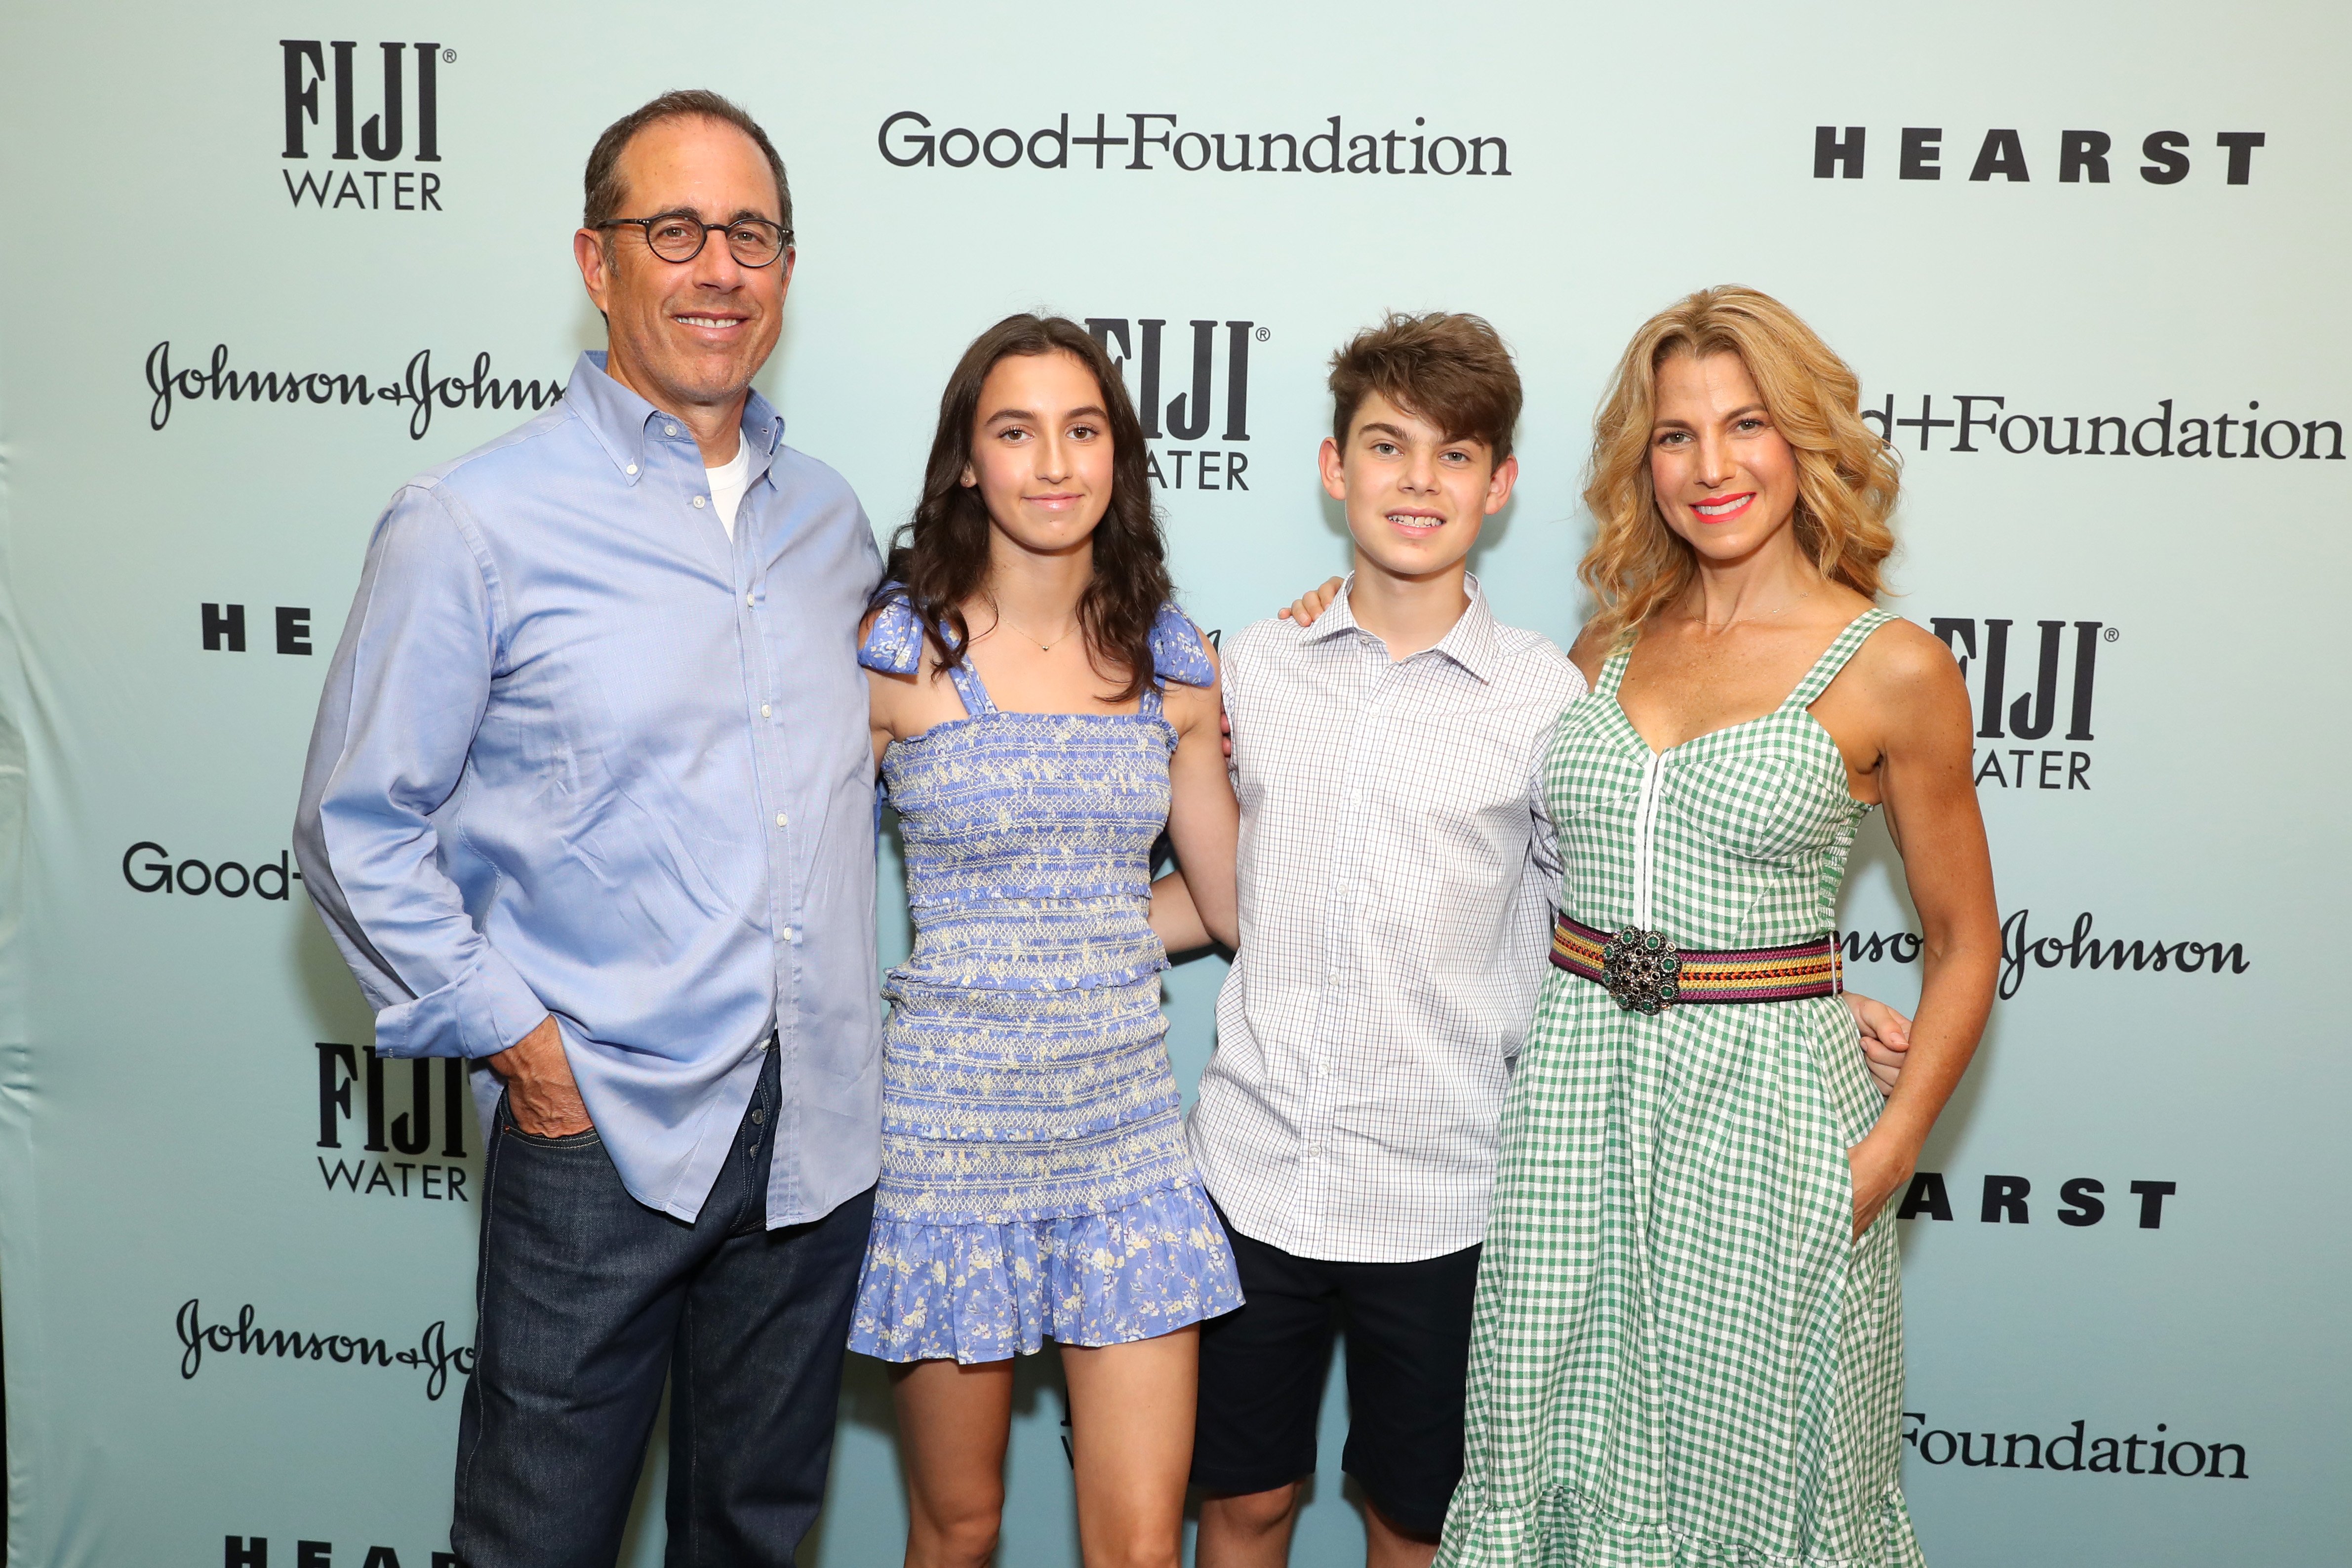 Jerry Seinfeld and his wife, Jessica Seinfeld with Sascha Seinfeld and Shepherd Seinfeld, attend Good+Foundation 2019 Bash presented by Hearst and Johnson & Johnson with FIJI Water at Victorian Gardens in Central Park, New York. | Source: Getty Images